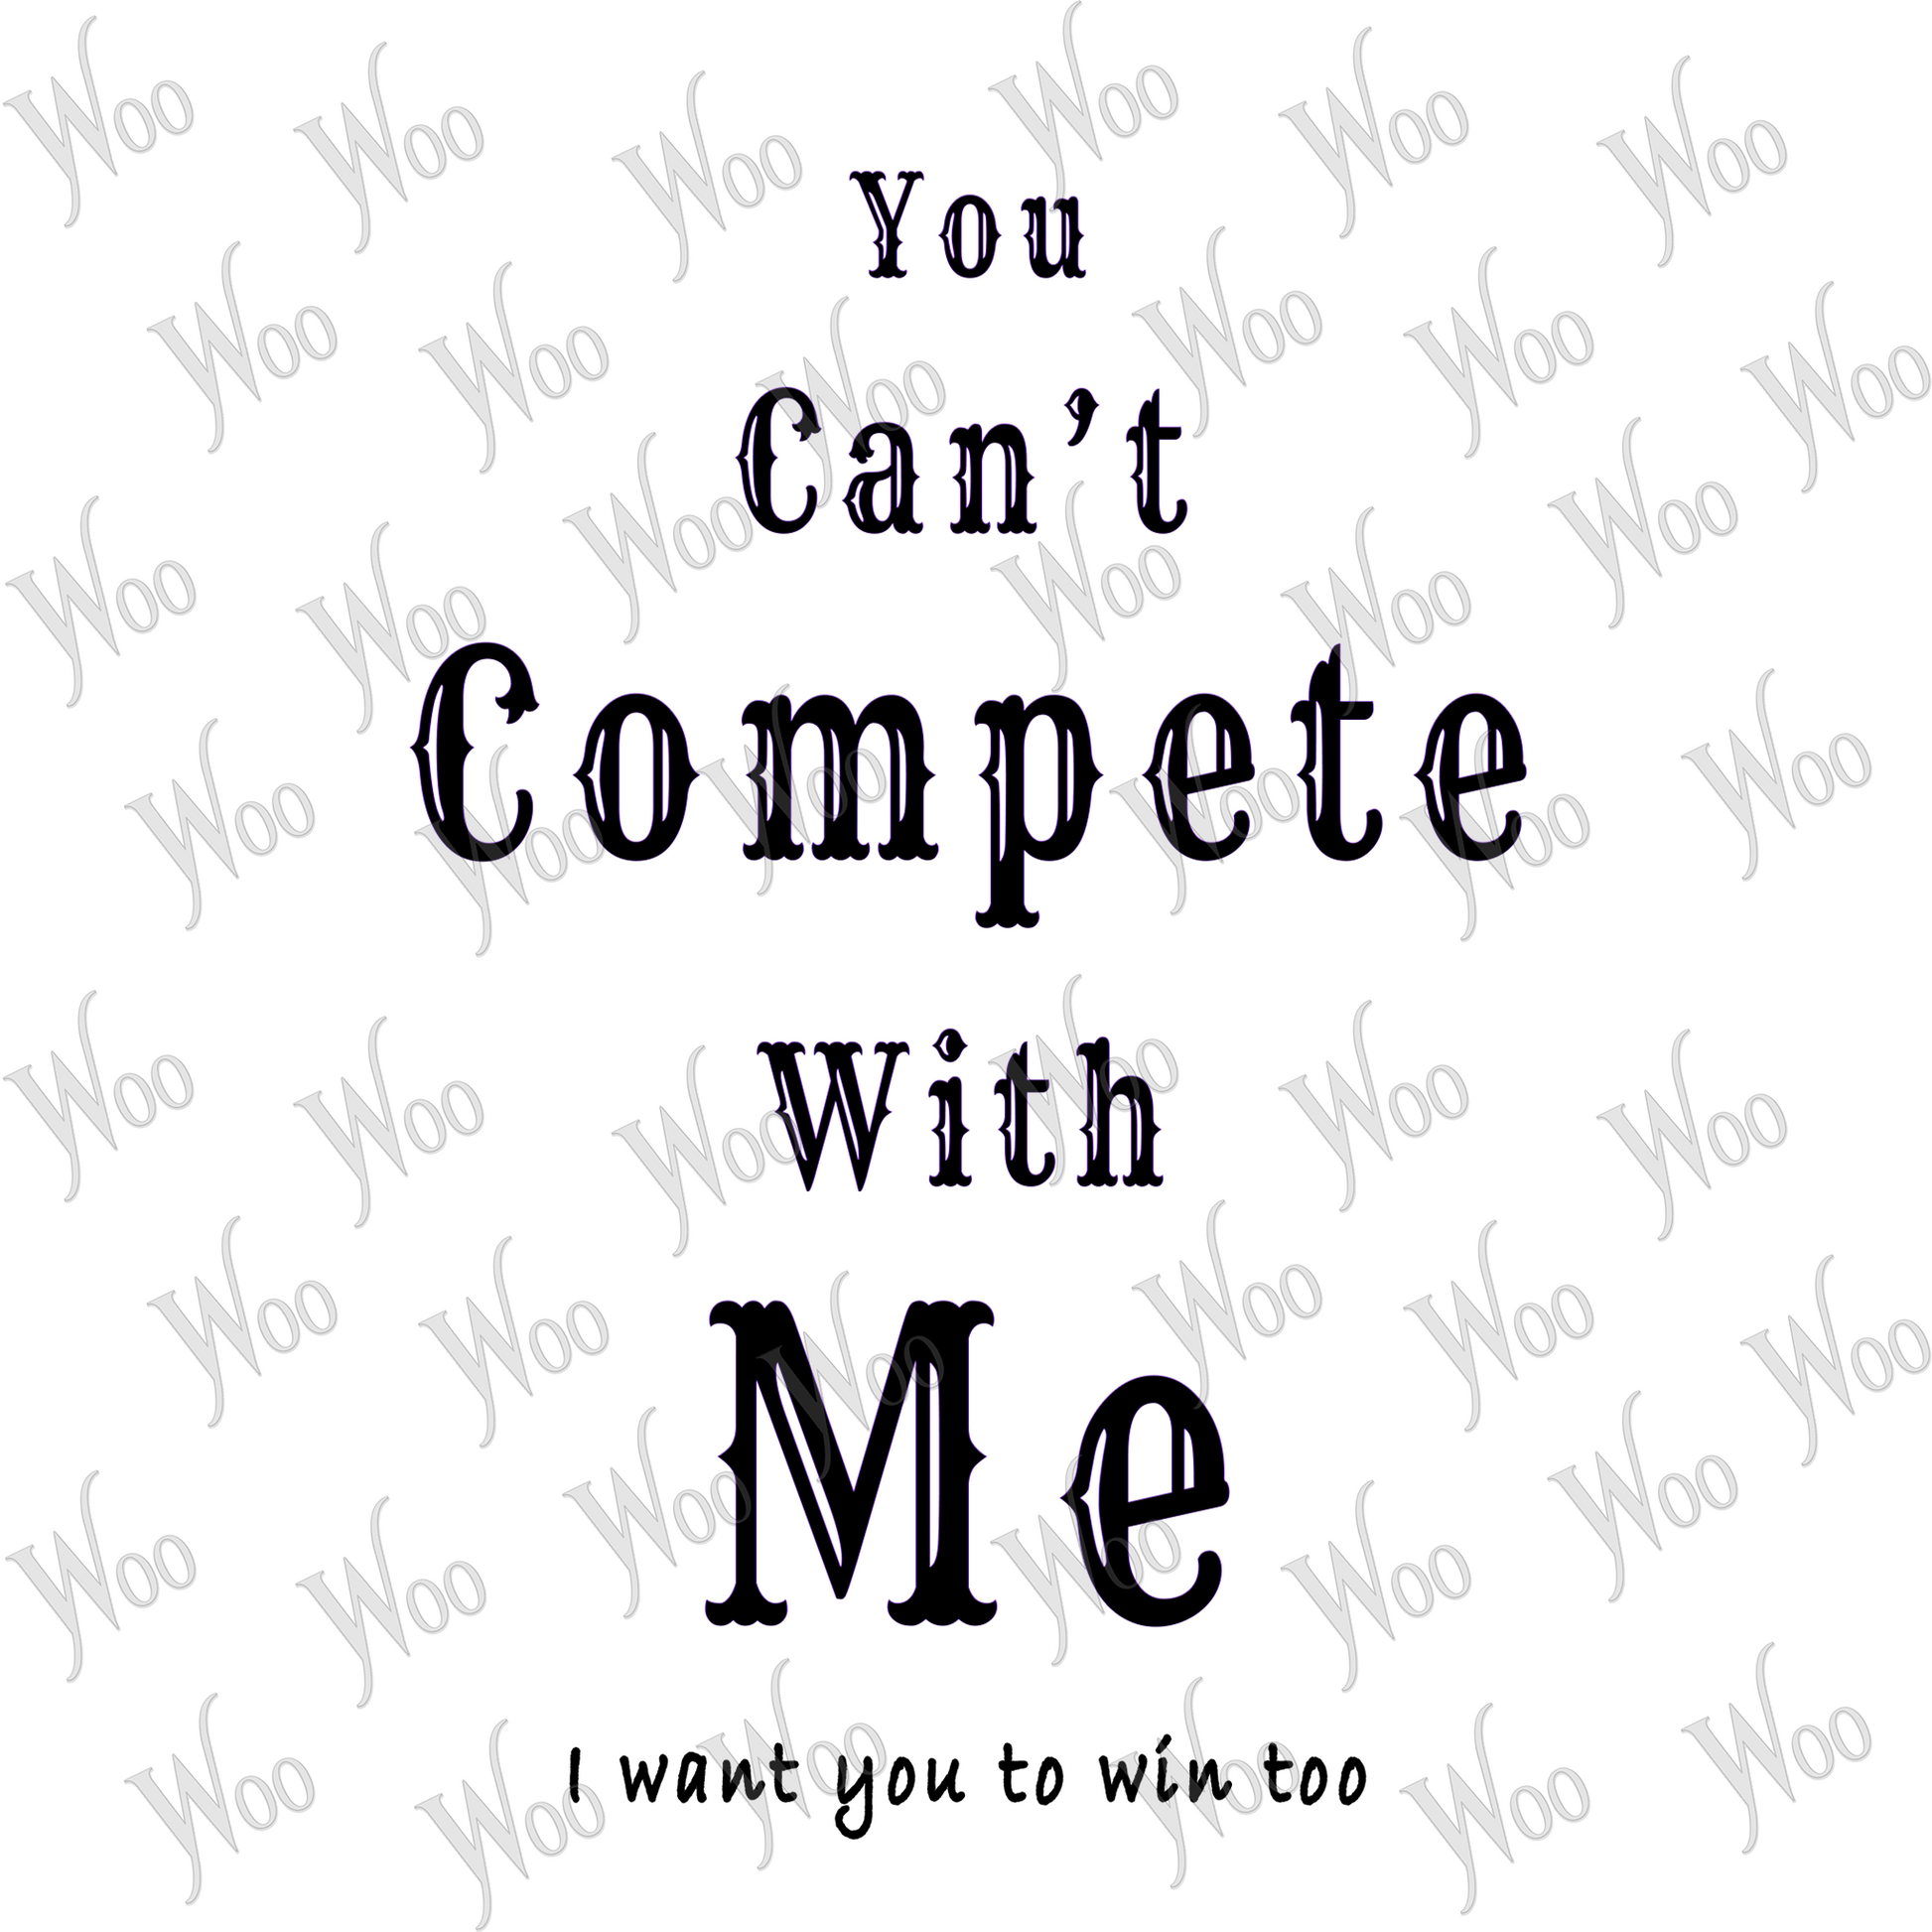 You Can't Compete With Me. I want you to wiin too.